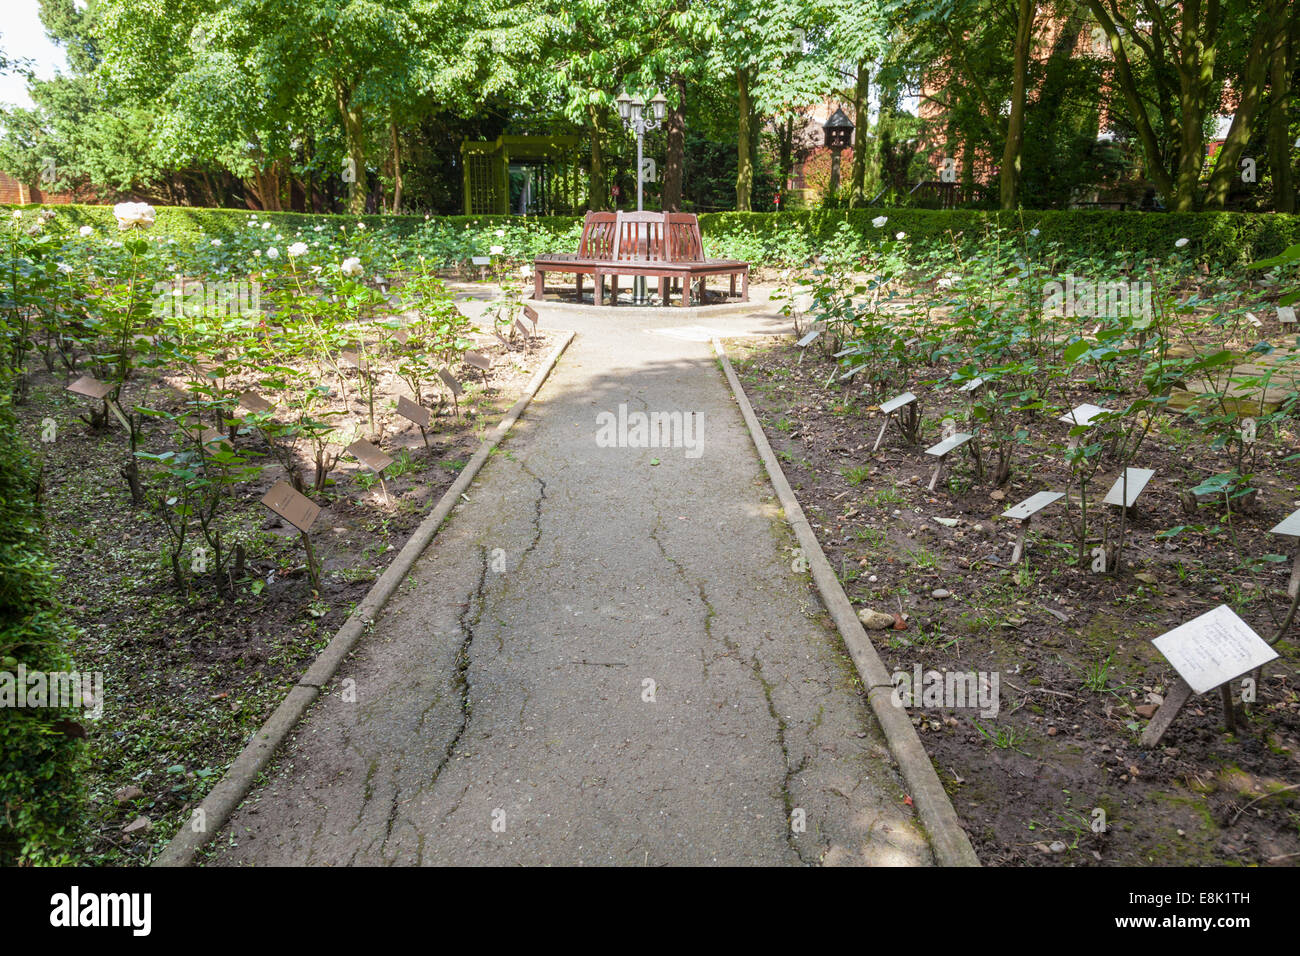 Memorial Garden at The National Holocaust Centre, Laxton, Nottinghamshire, England, UK Stock Photo